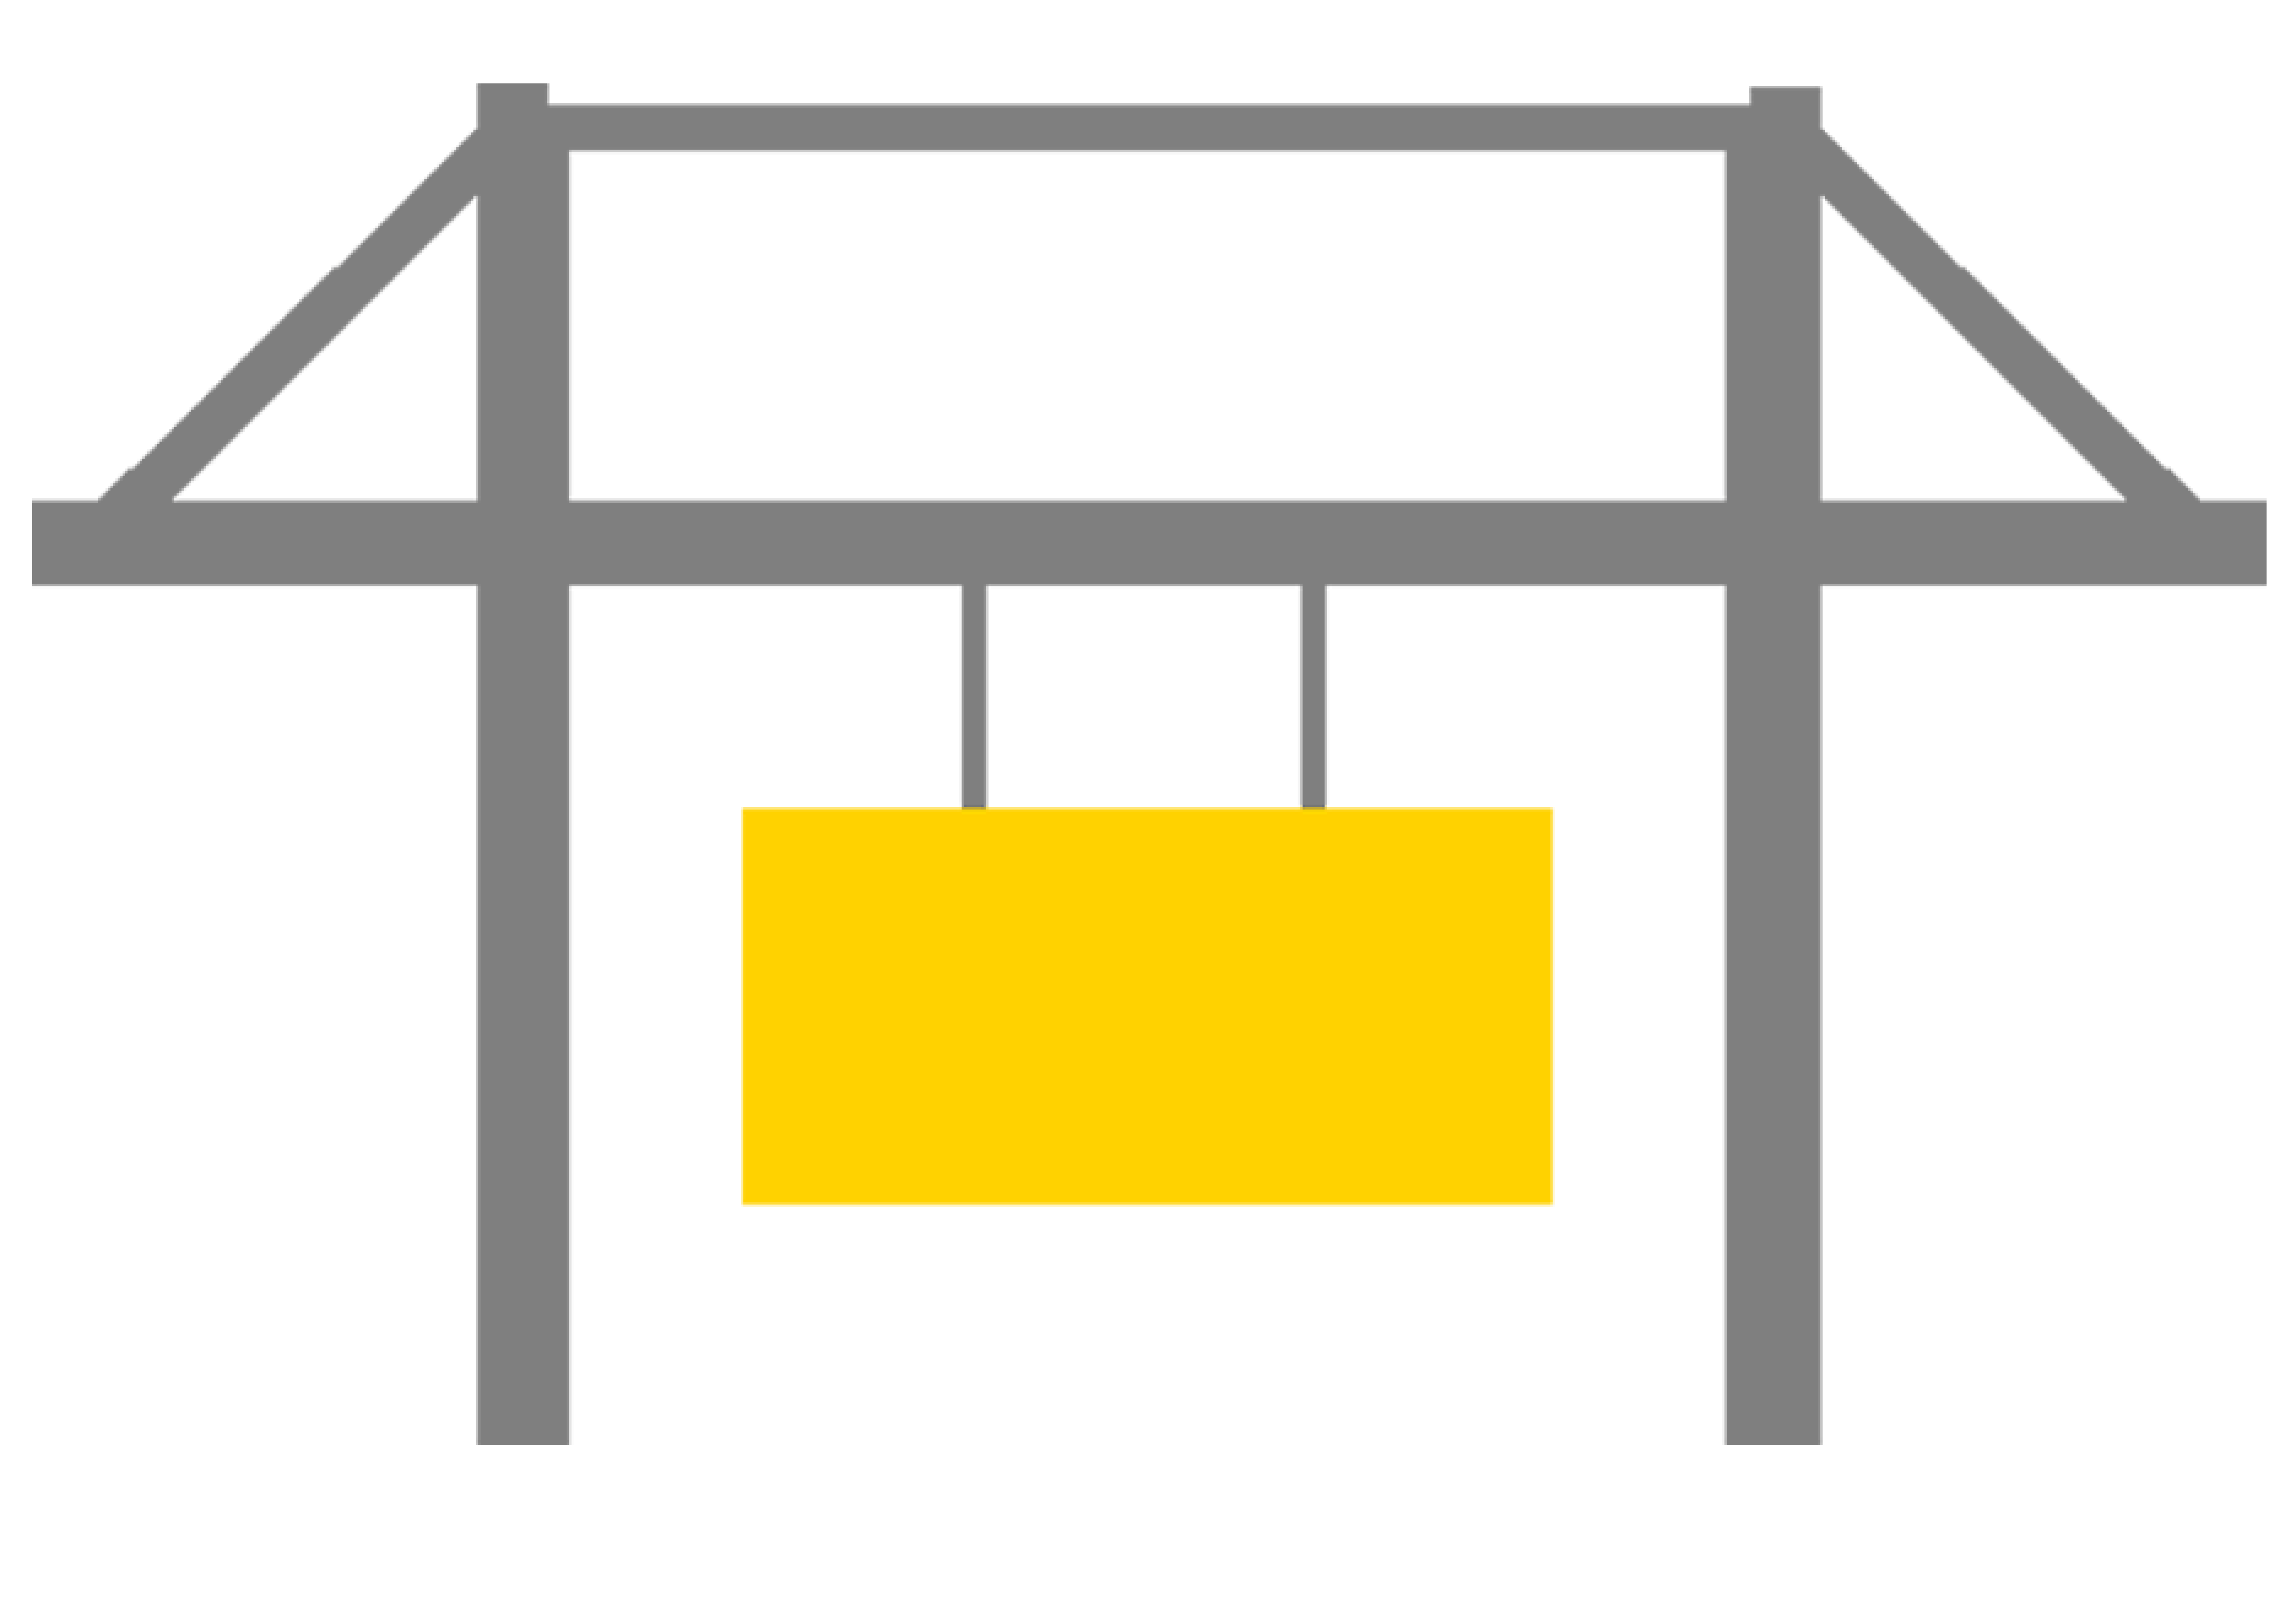 An Icon of a terminal crane carrying a yellow container.